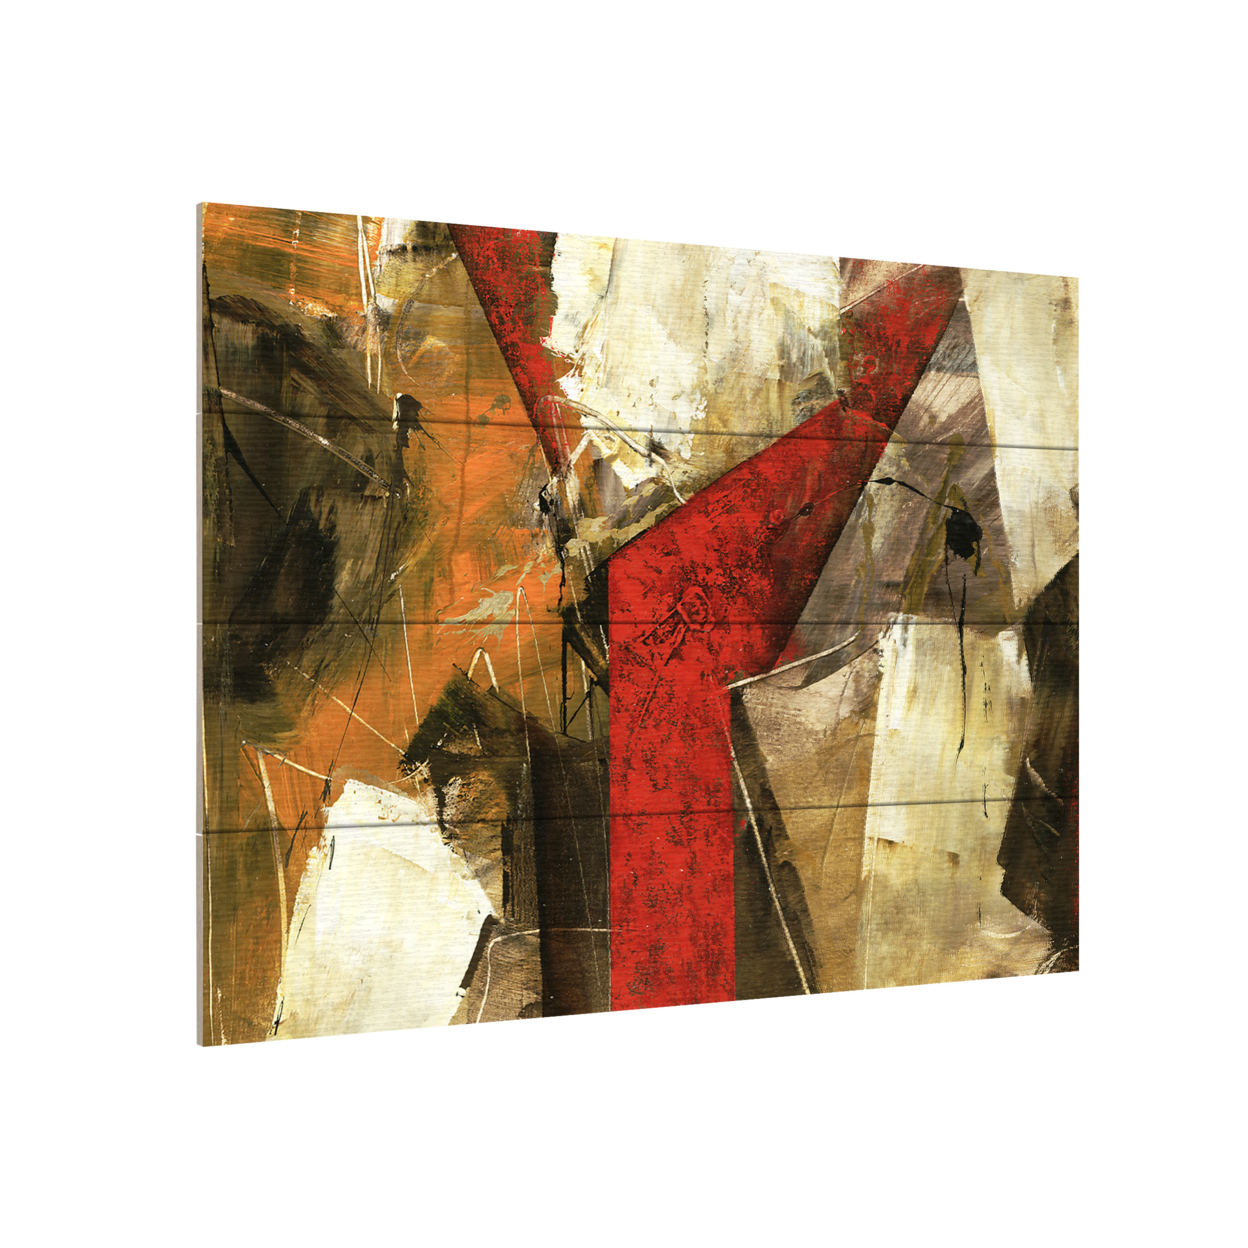 Wall Art 12 X 16 Inches Titled Abstract IX Ready To Hang Printed On Wooden Planks